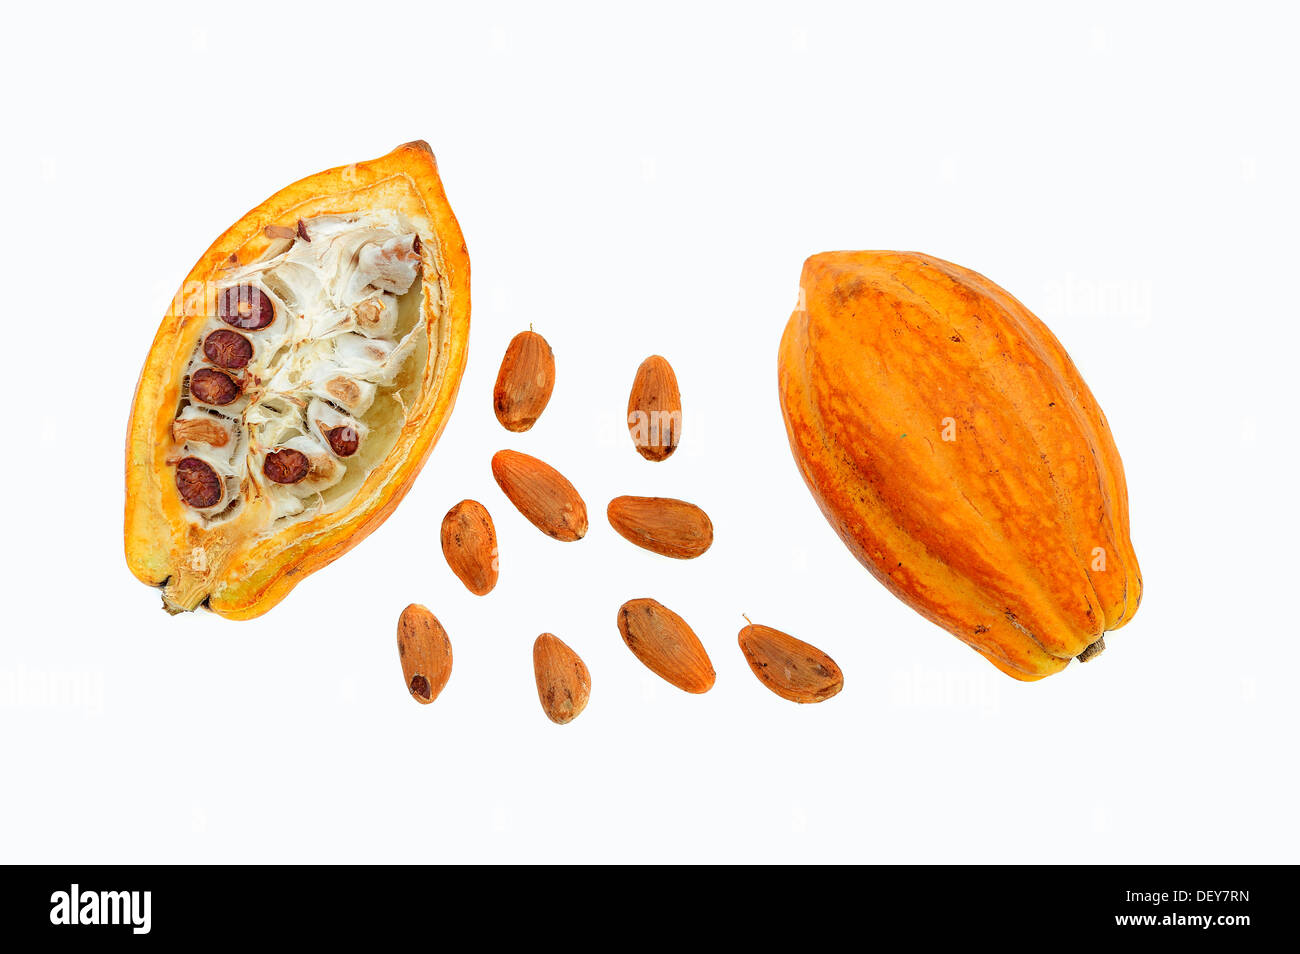 Halved fruit with cocoa beans (Theobroma cacao) Stock Photo